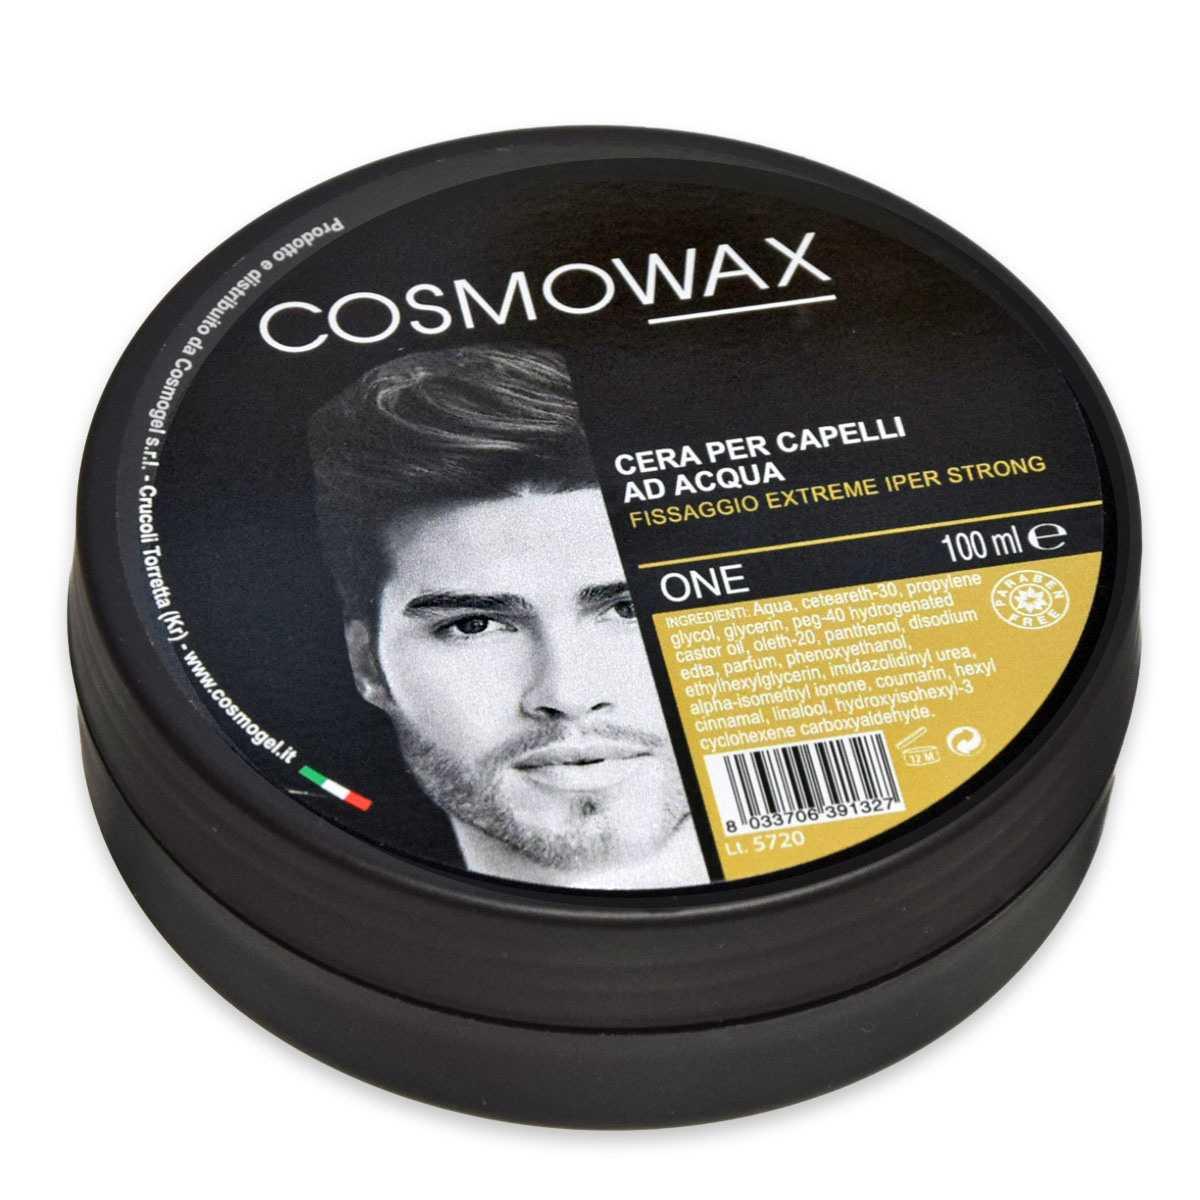 Cera cosmowax iper strong one 100 ml